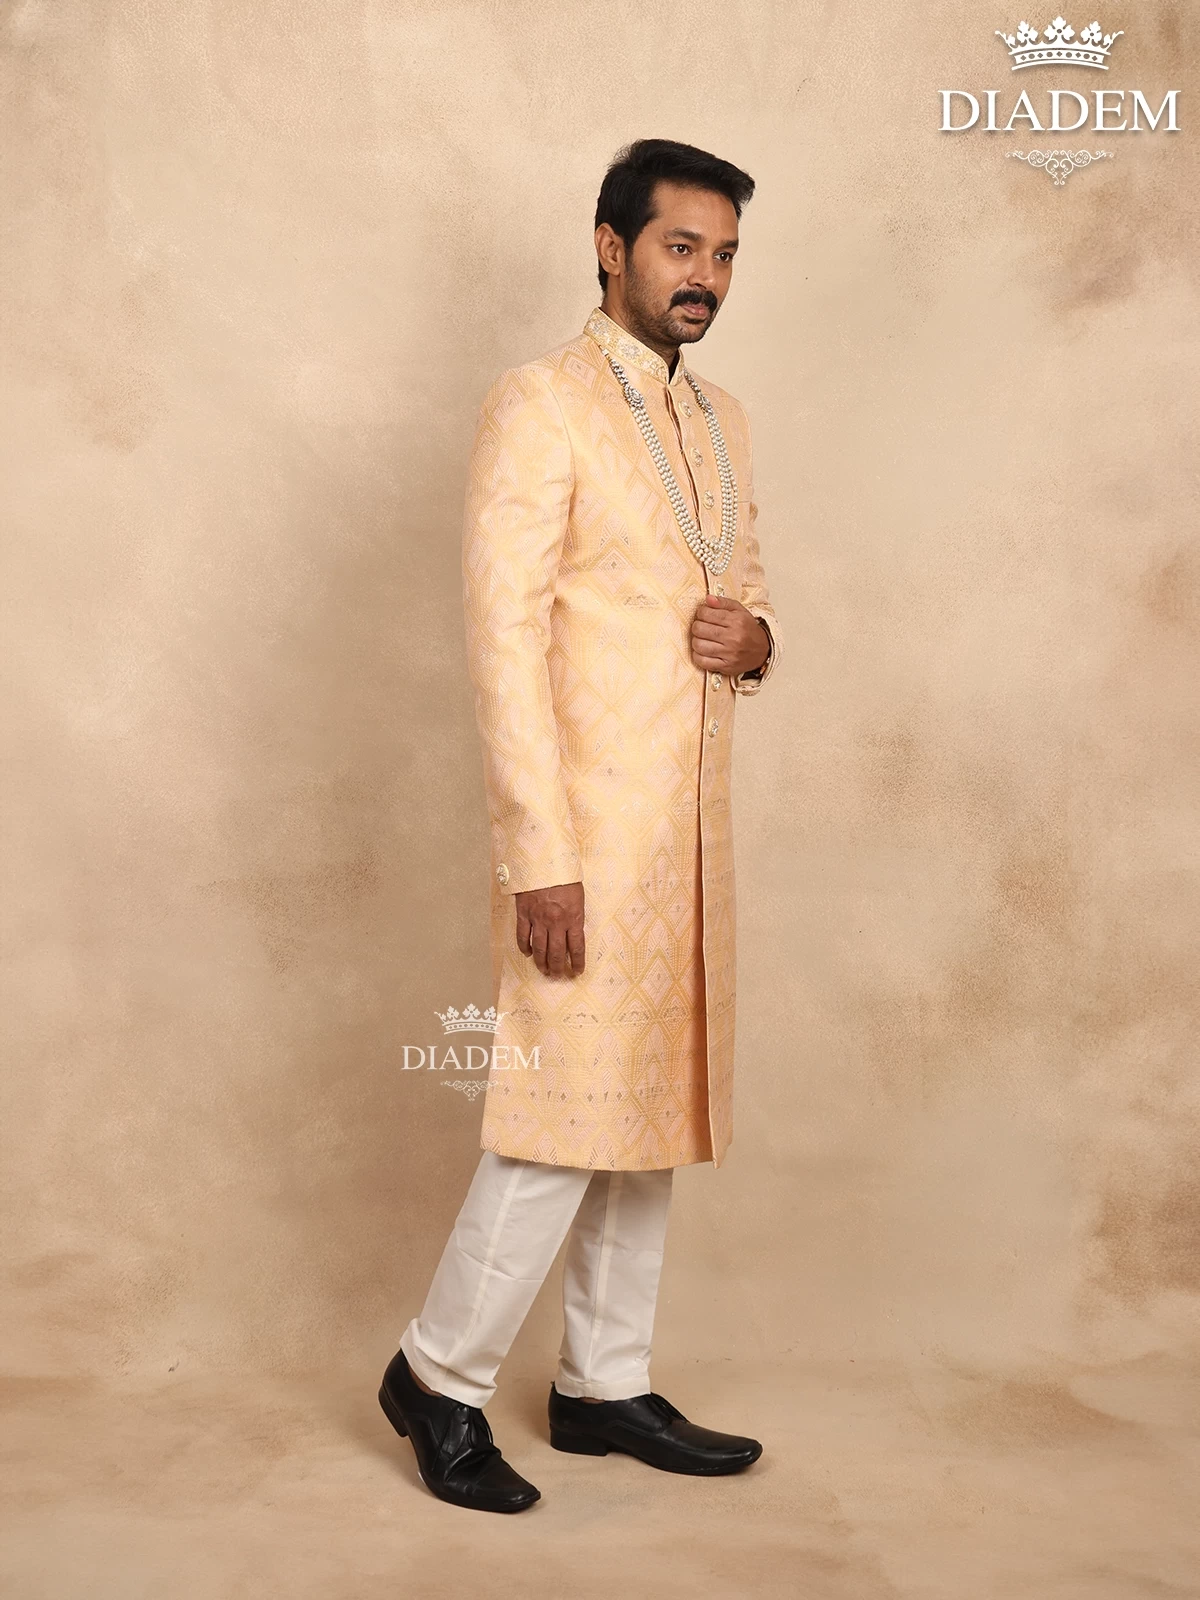 Sandal Jacquard Sherwani Suit Adorned With Embossed Details, Paired With Bead Mala